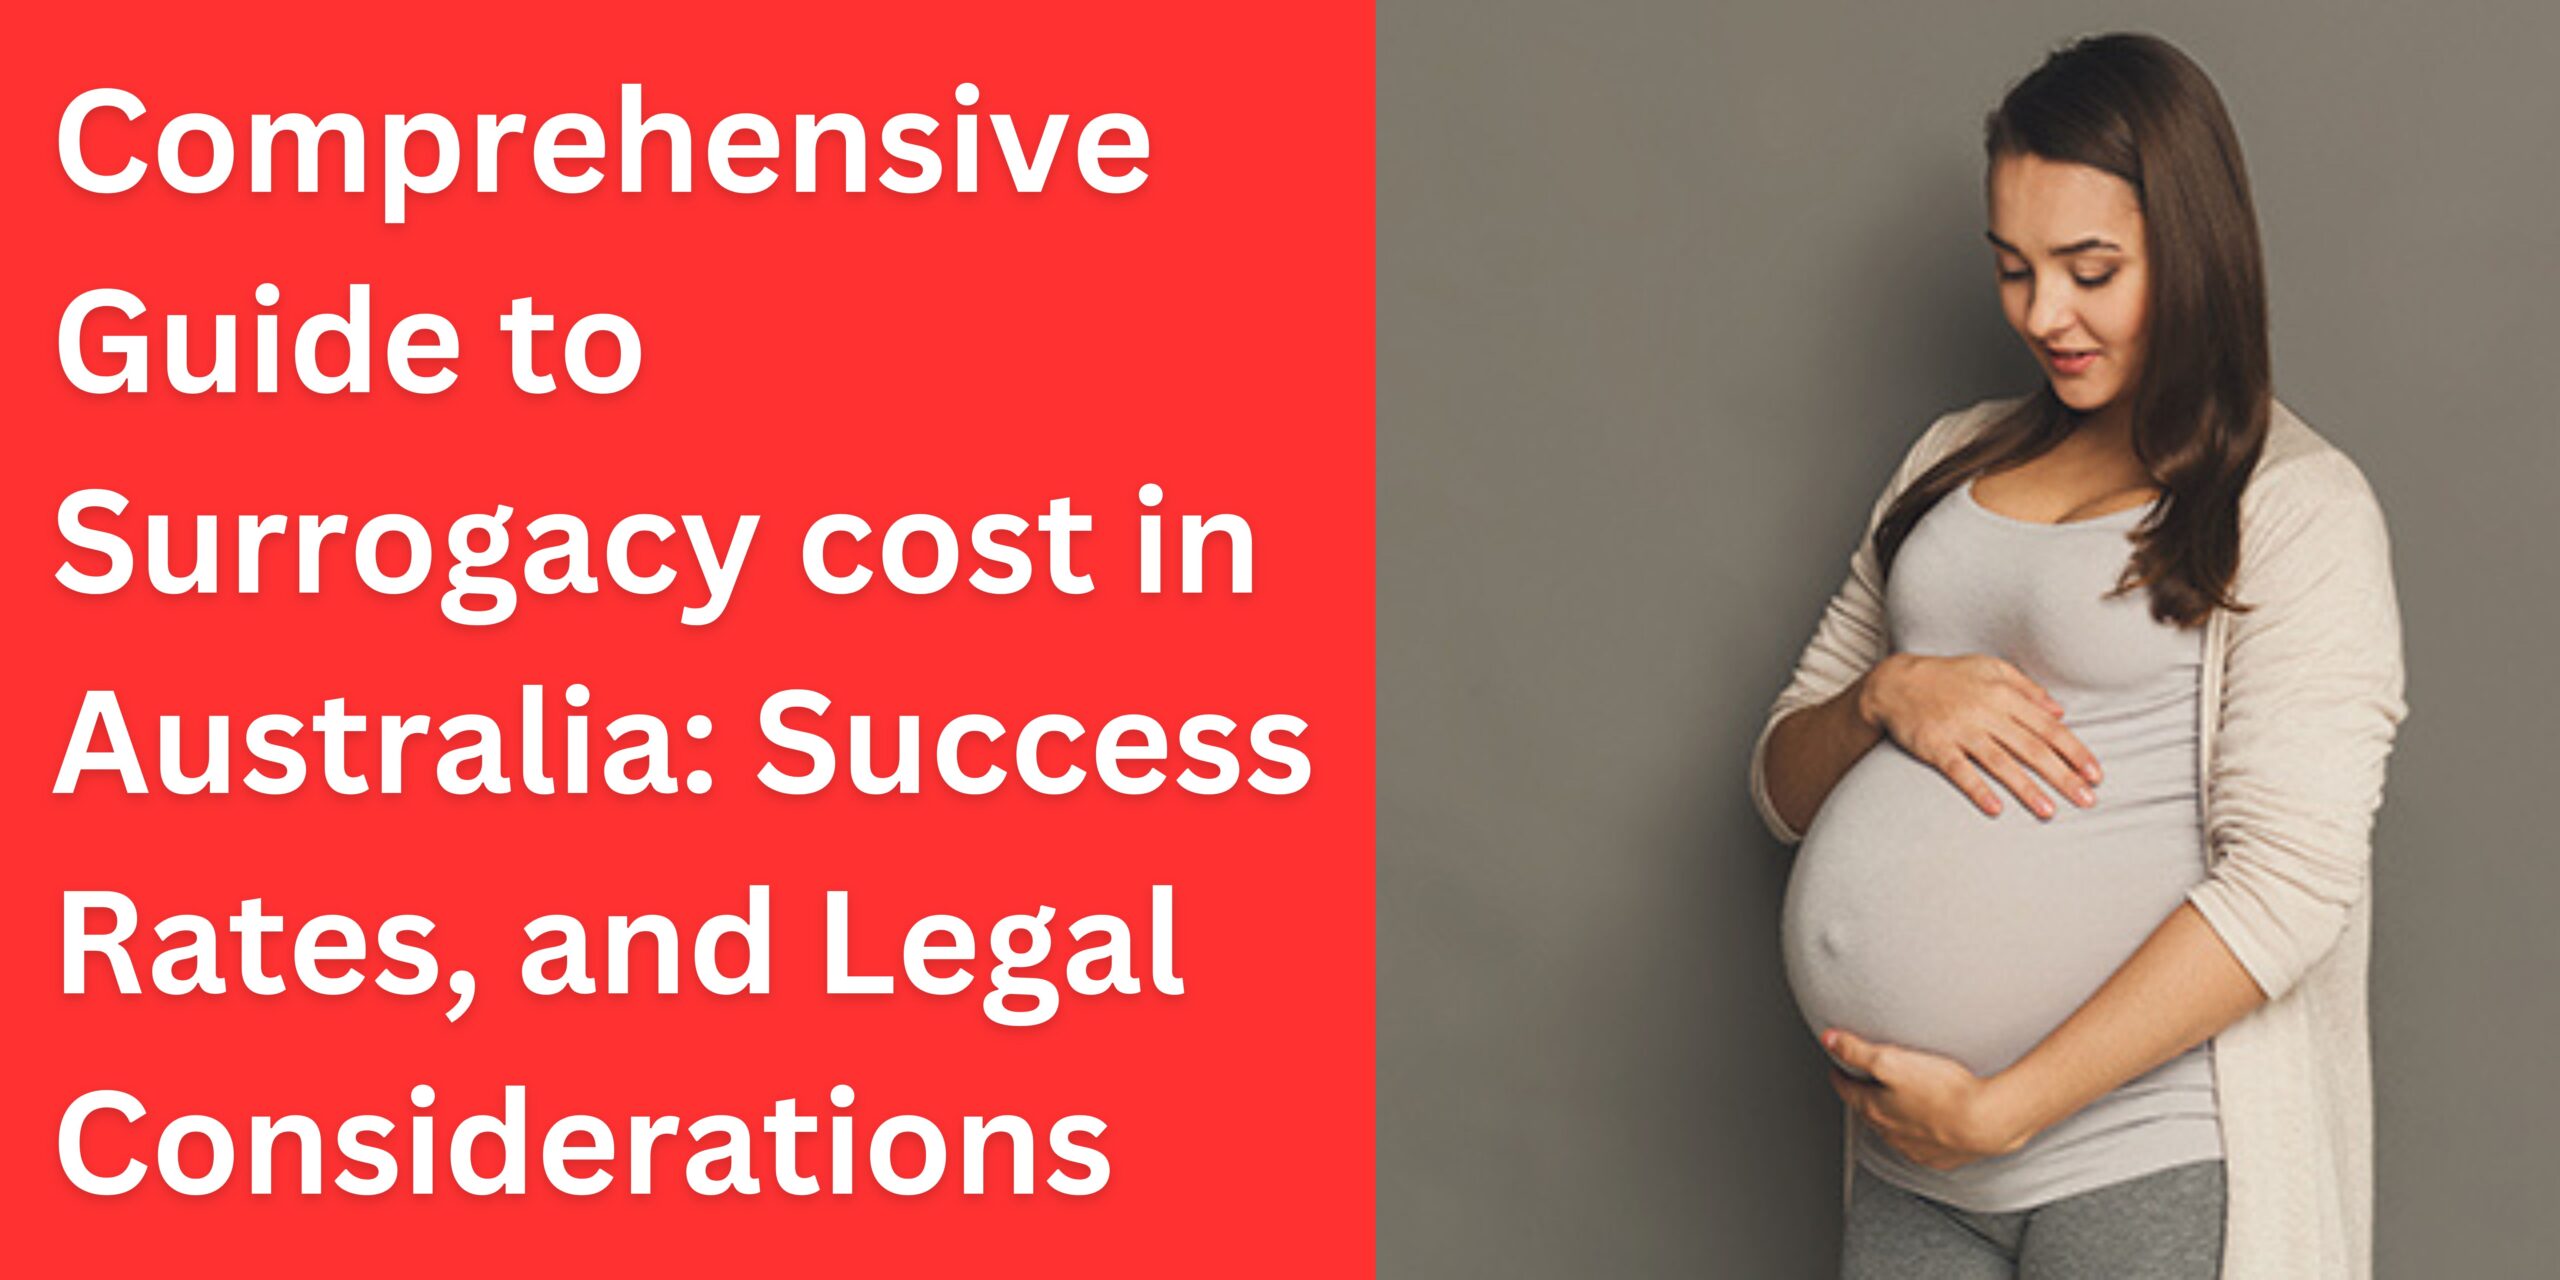 Comprehensive Guide to Surrogacy cost in Australia: Success Rates, and Legal Considerations